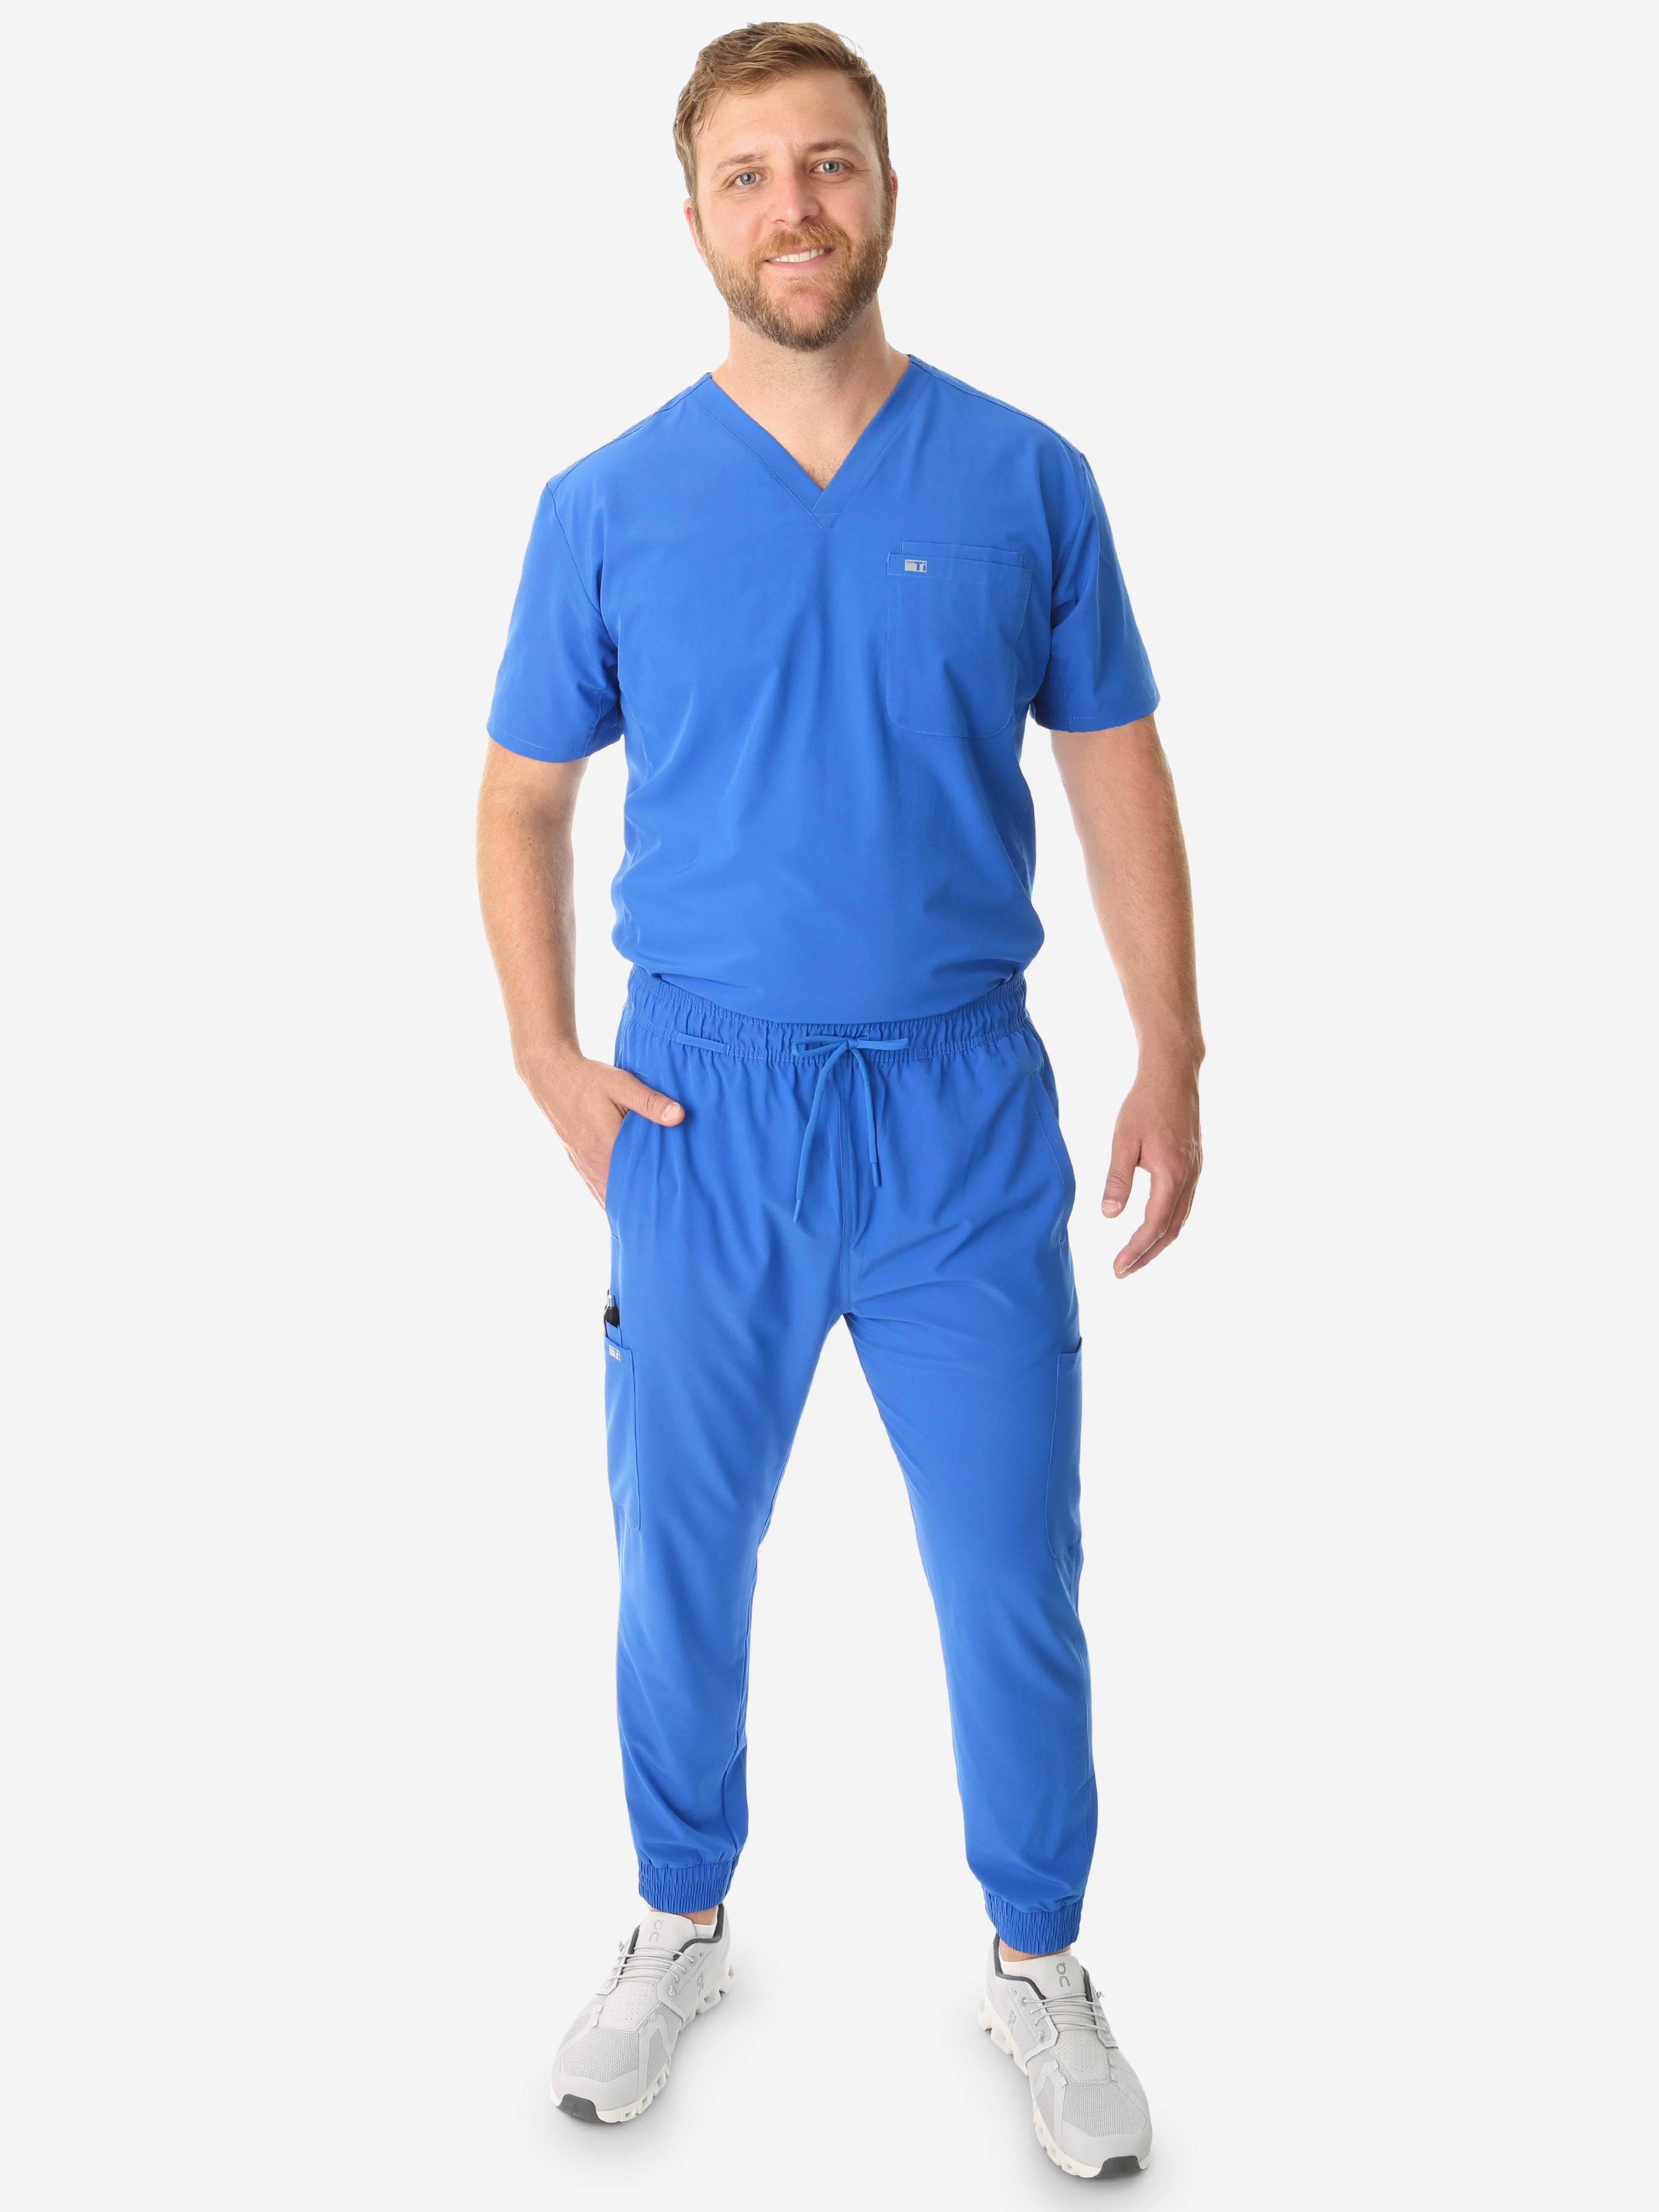 TiScrubs Men's Stretch Royal Blue Double-Pocket Scrub Top and Jogger Pants Full Body Front